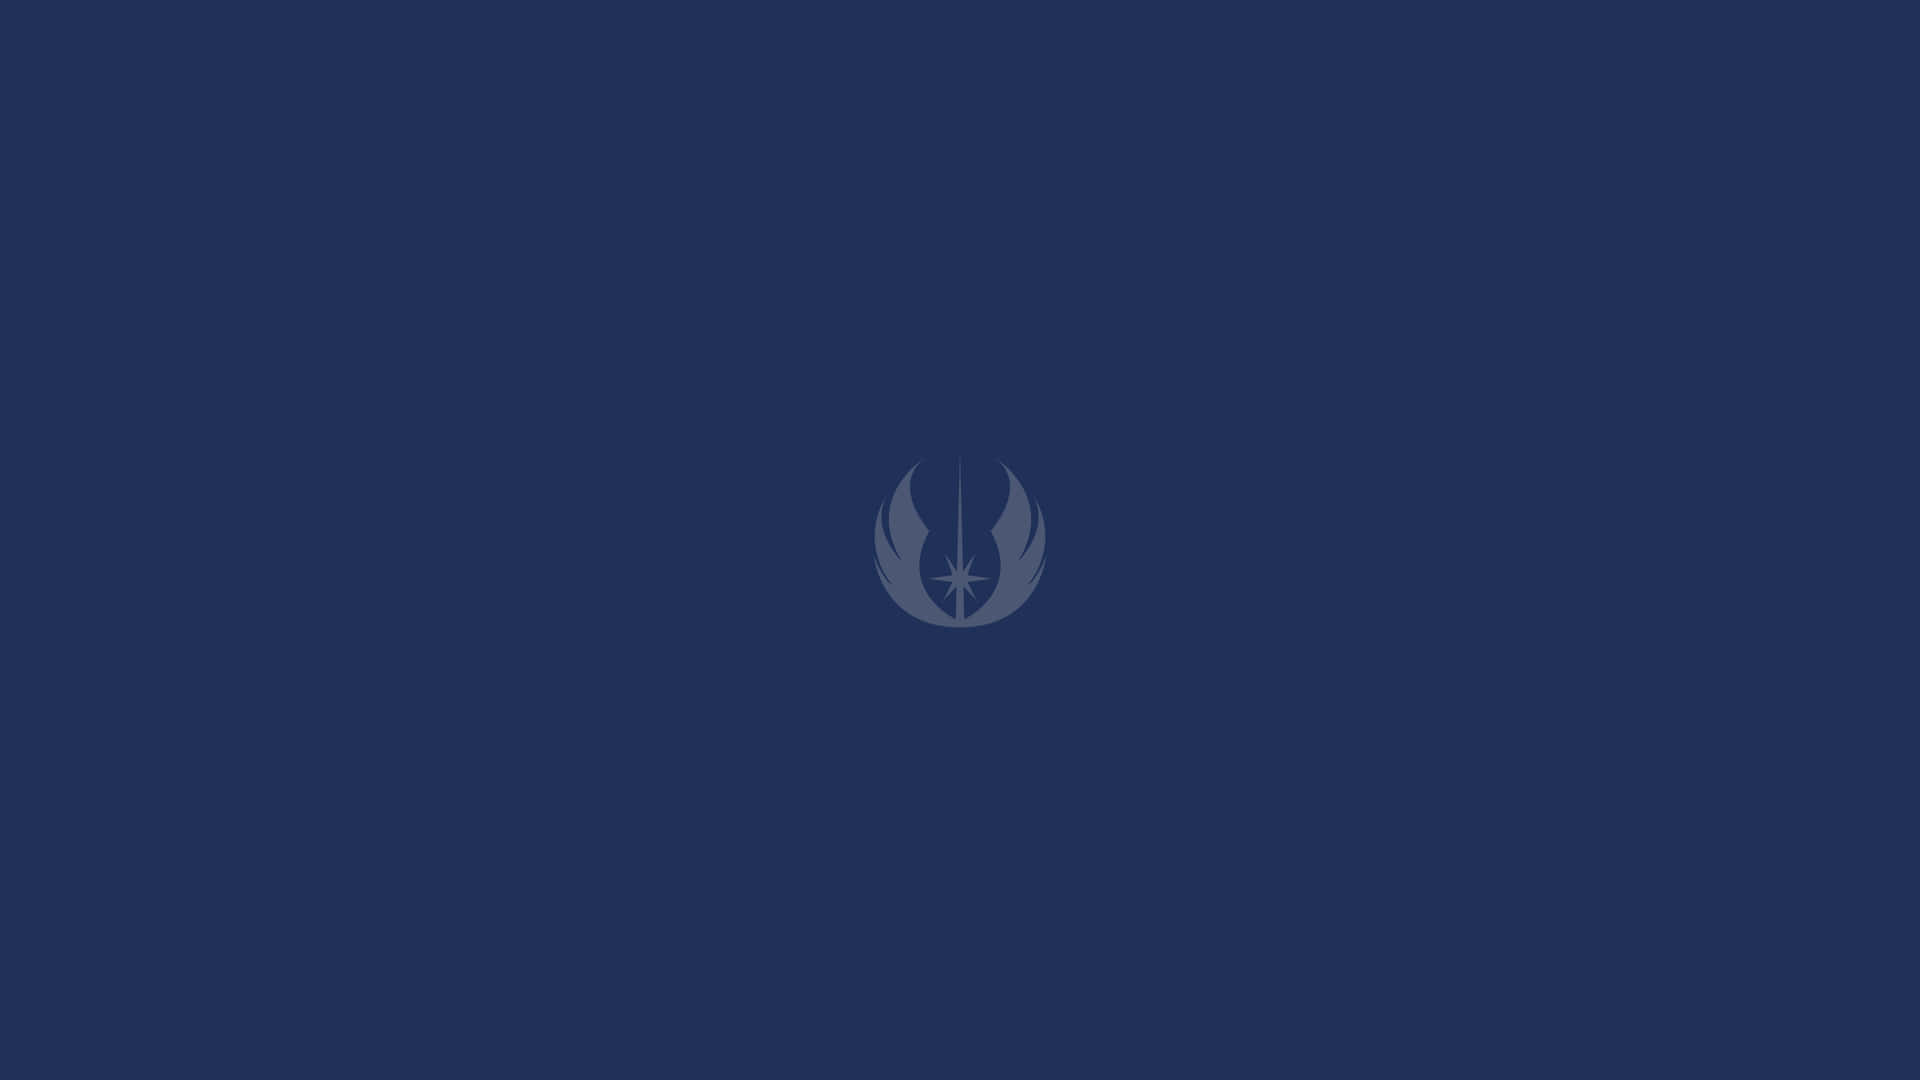 “The Force Awakens in a New Generation of Jedis” Wallpaper